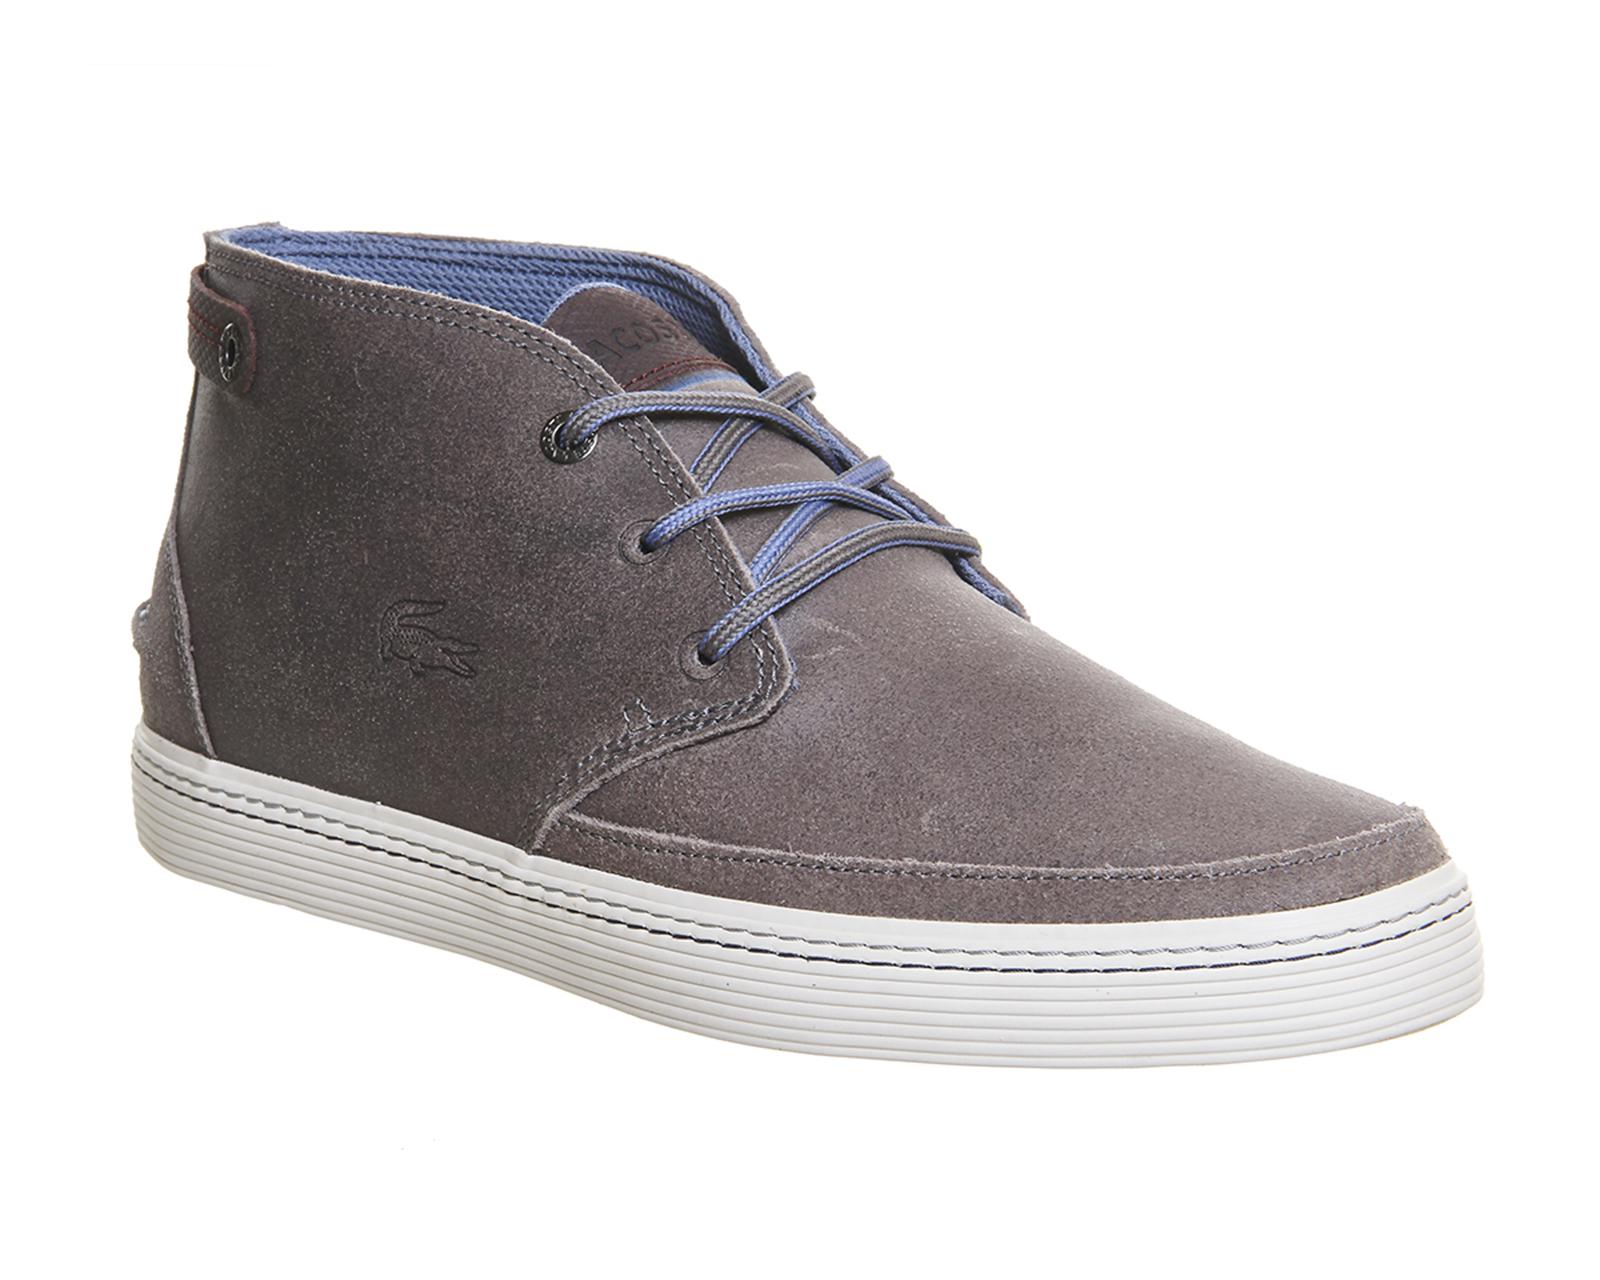 Lacoste Clavel Lace Up Chukka Boots Store - www.puzzlewood.net 1694673961